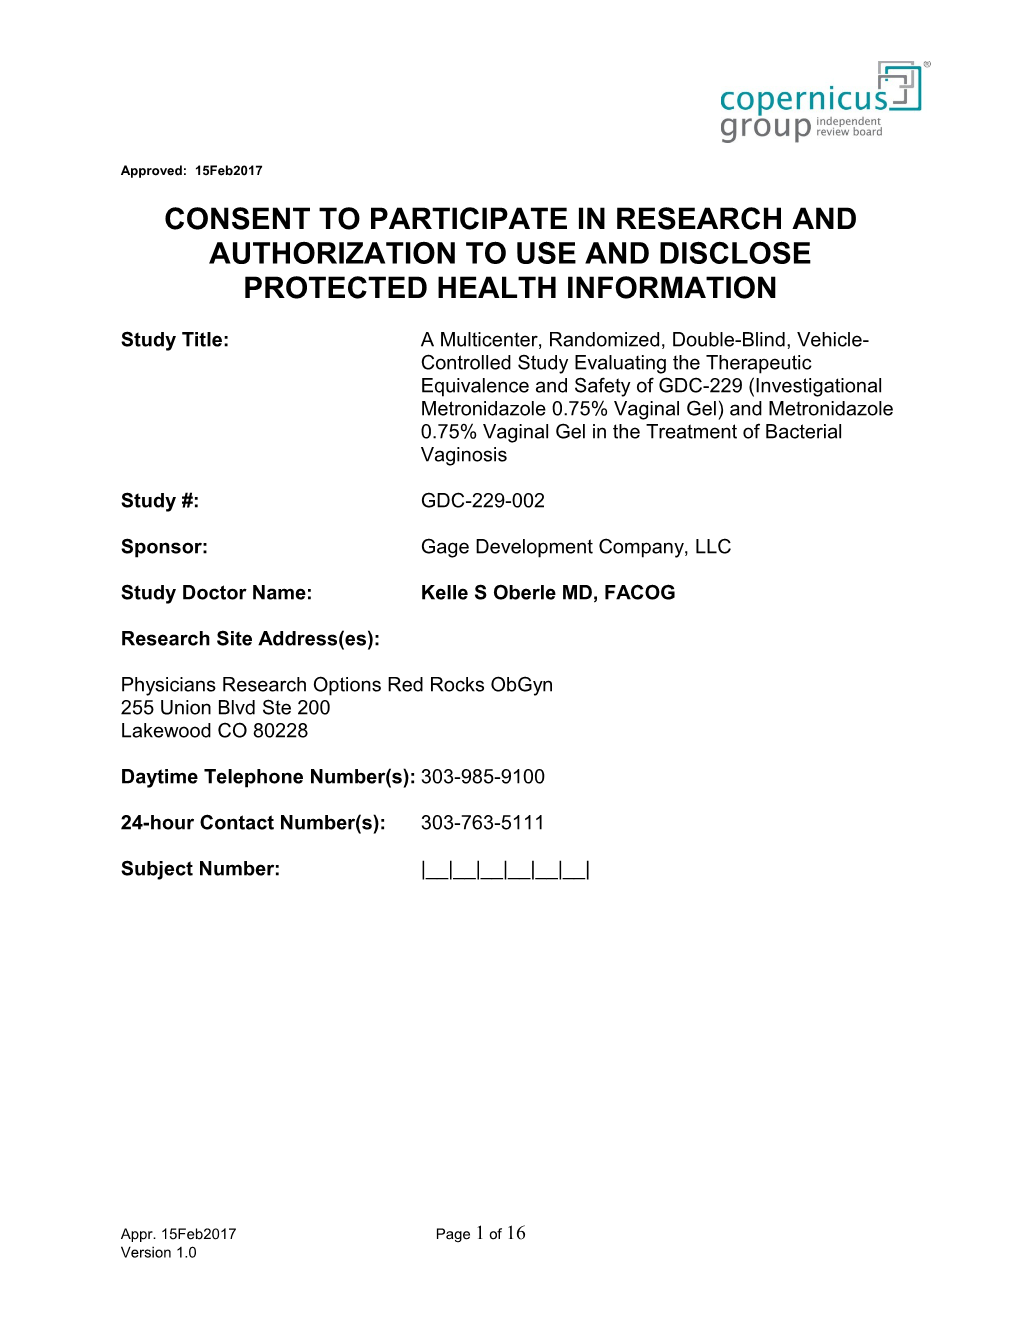 Consent to Participate in Researchand Authorization to Use and Discloseprotected Health